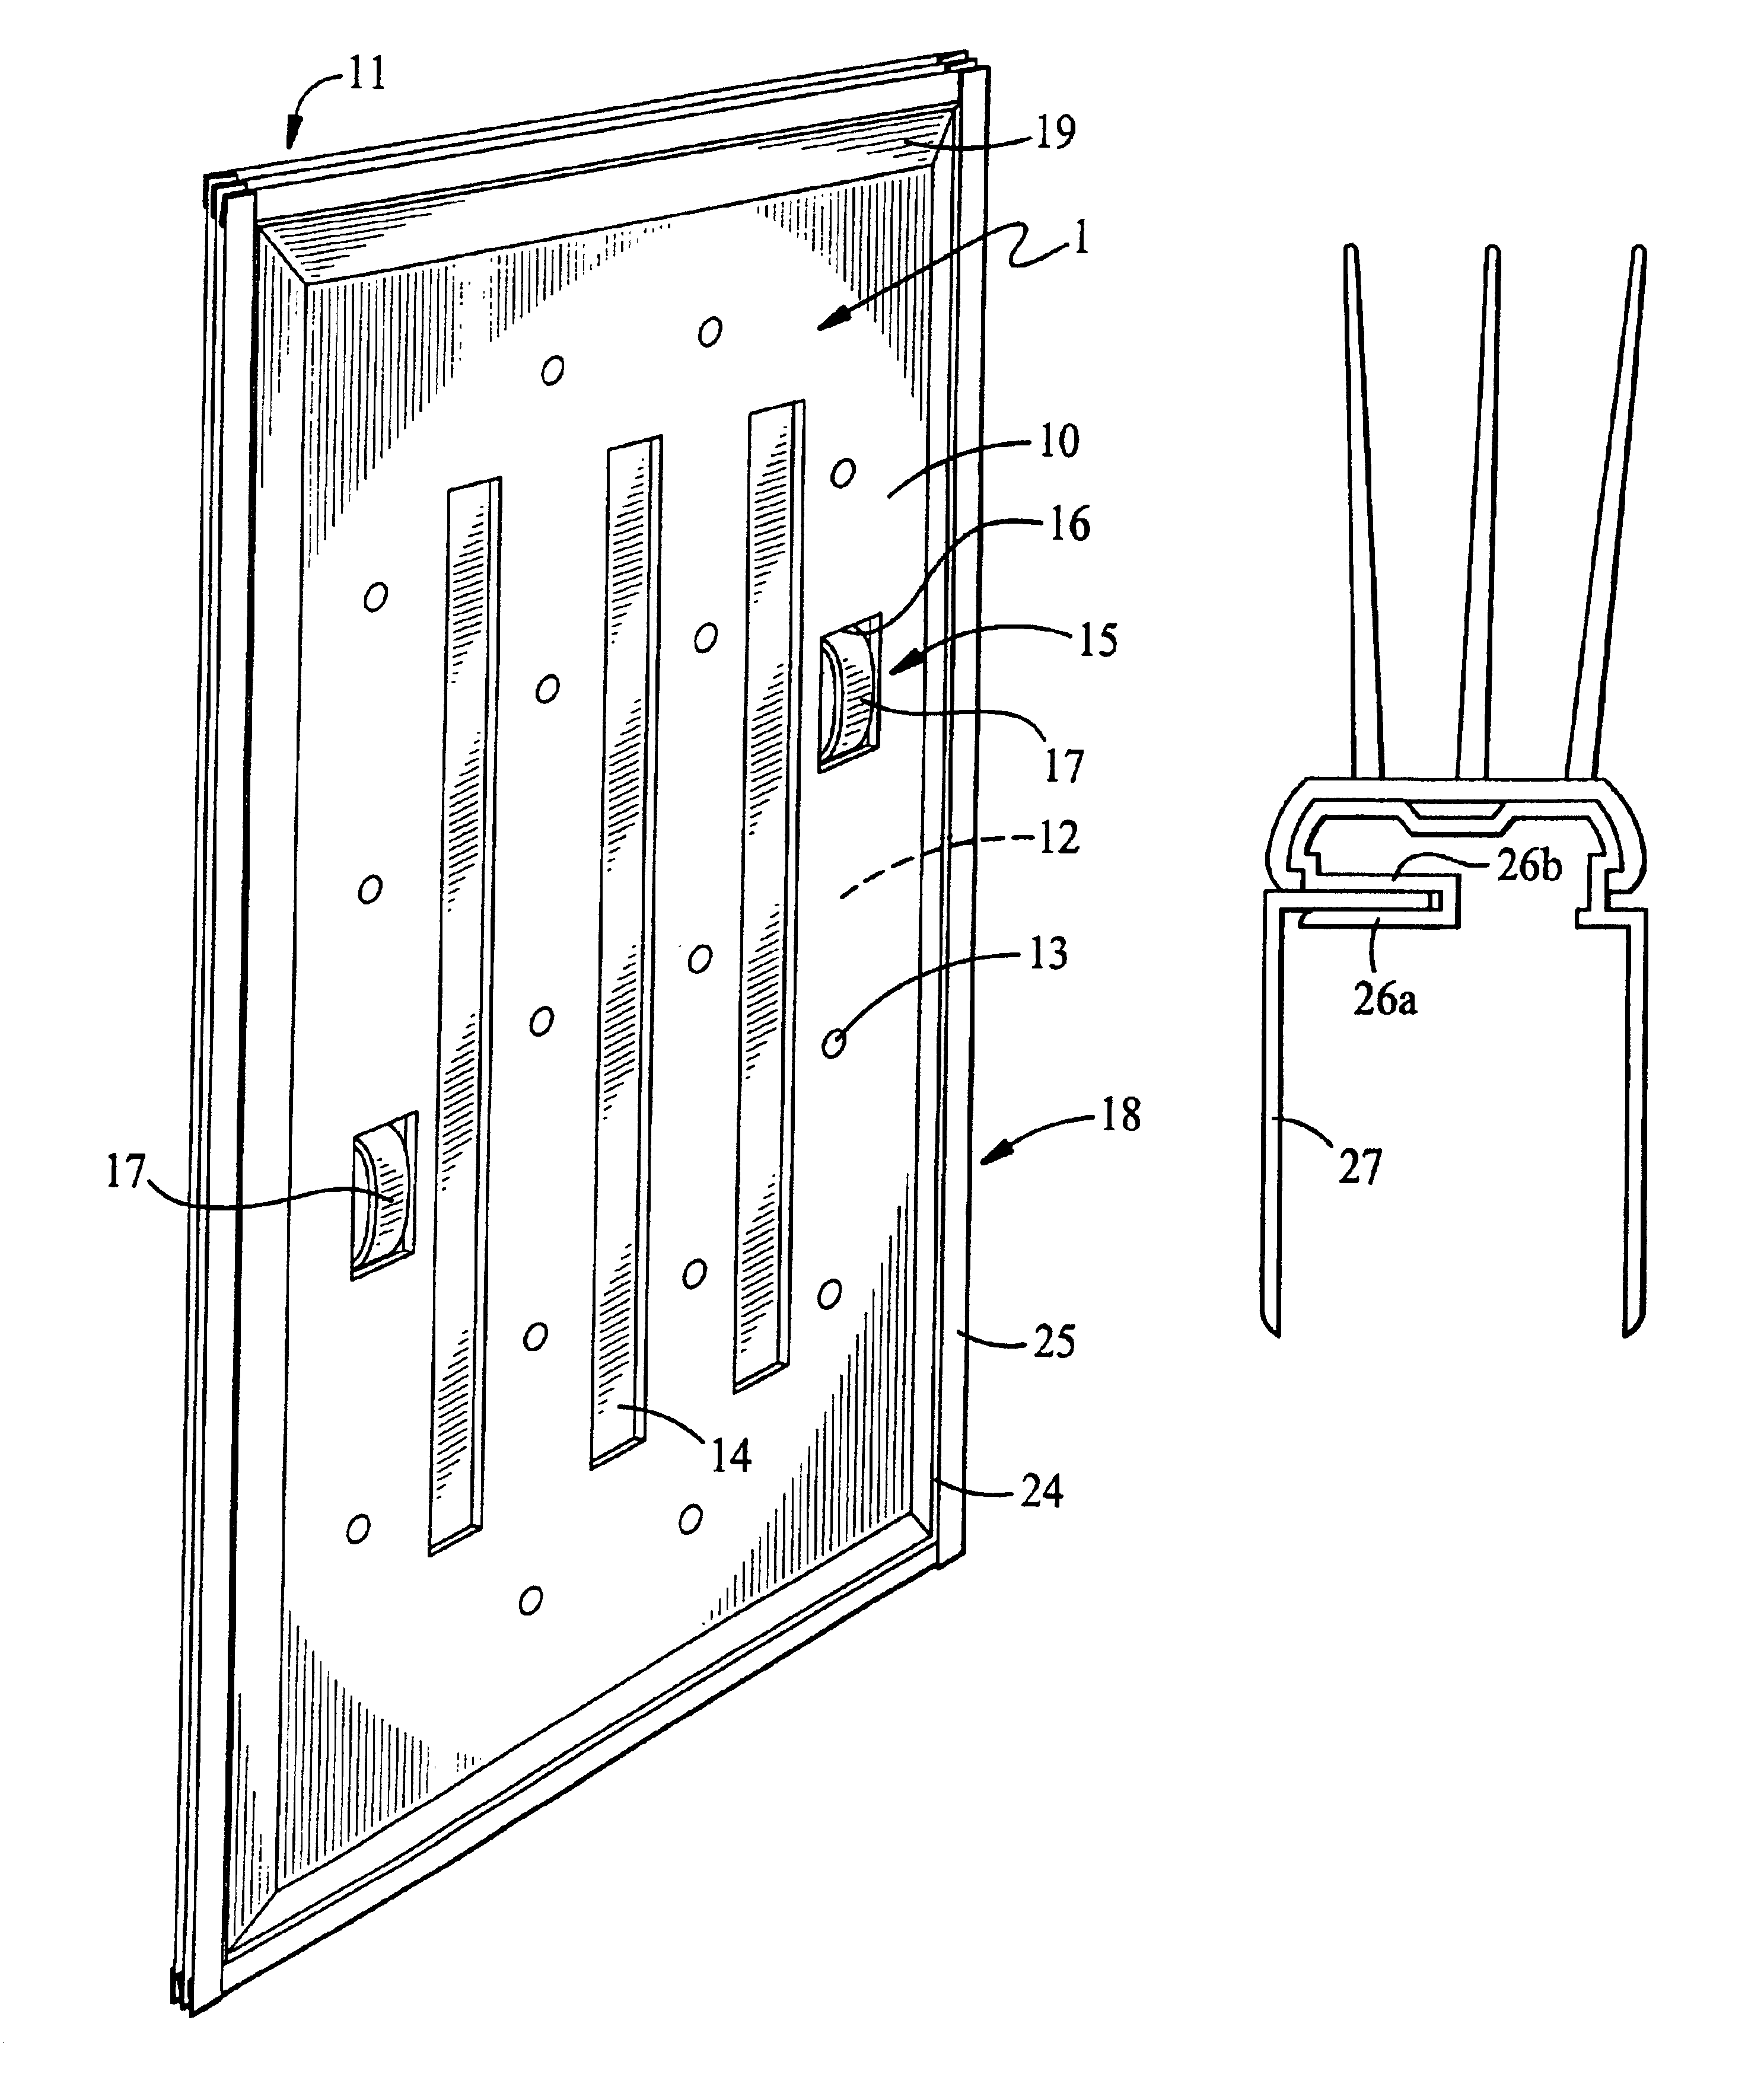 Bulkhead and partition systems